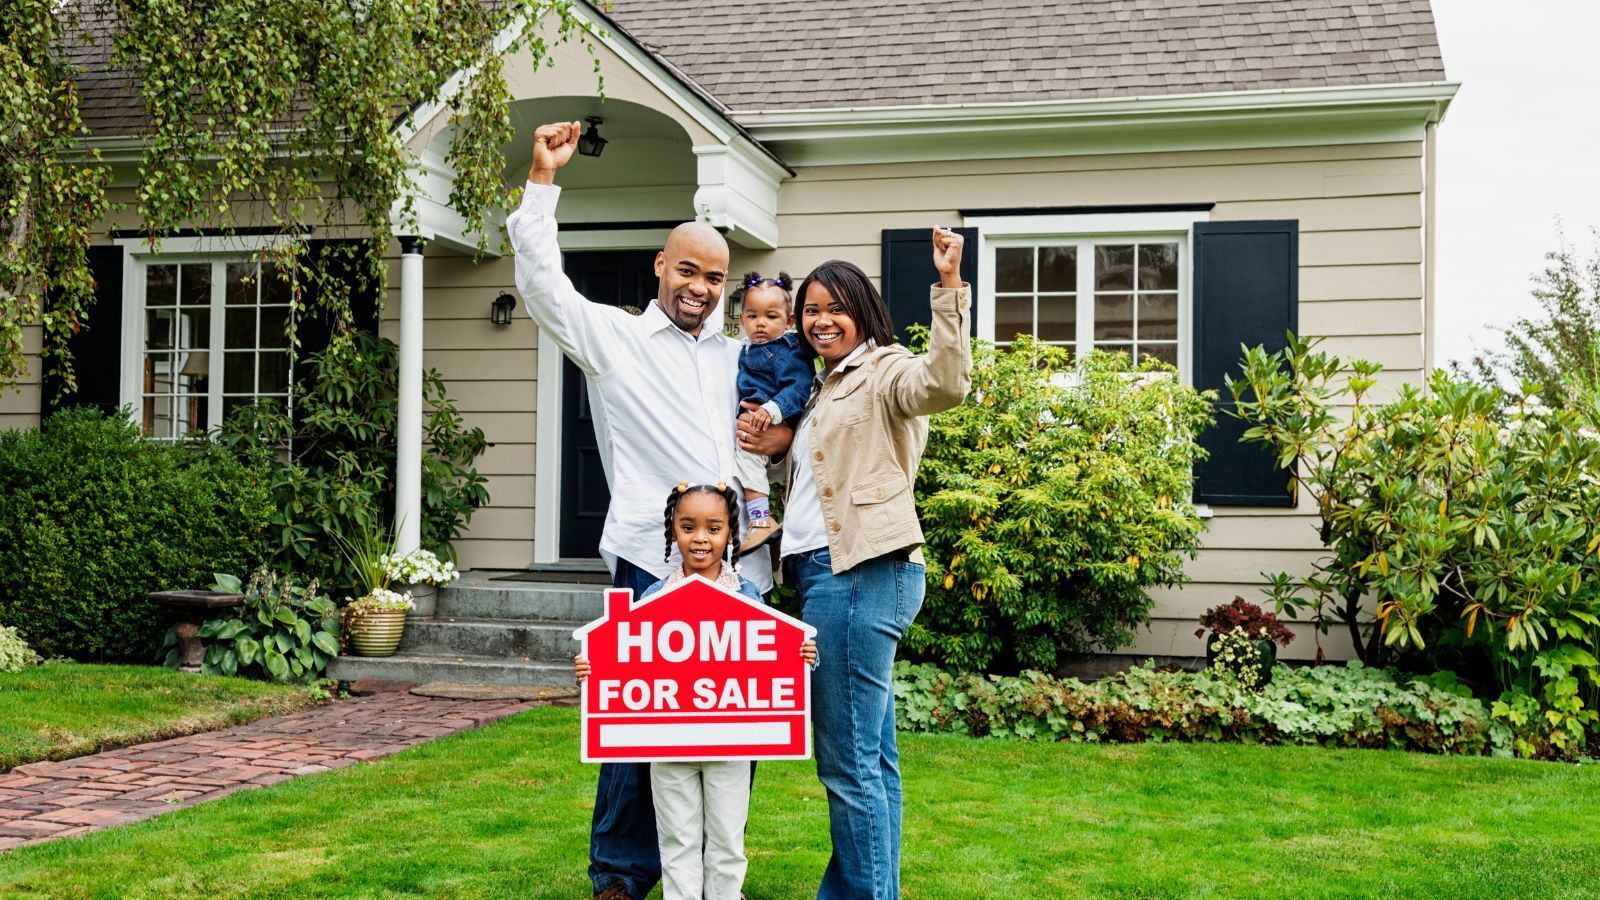 A family excitedly holding a 'home for sale' sign.